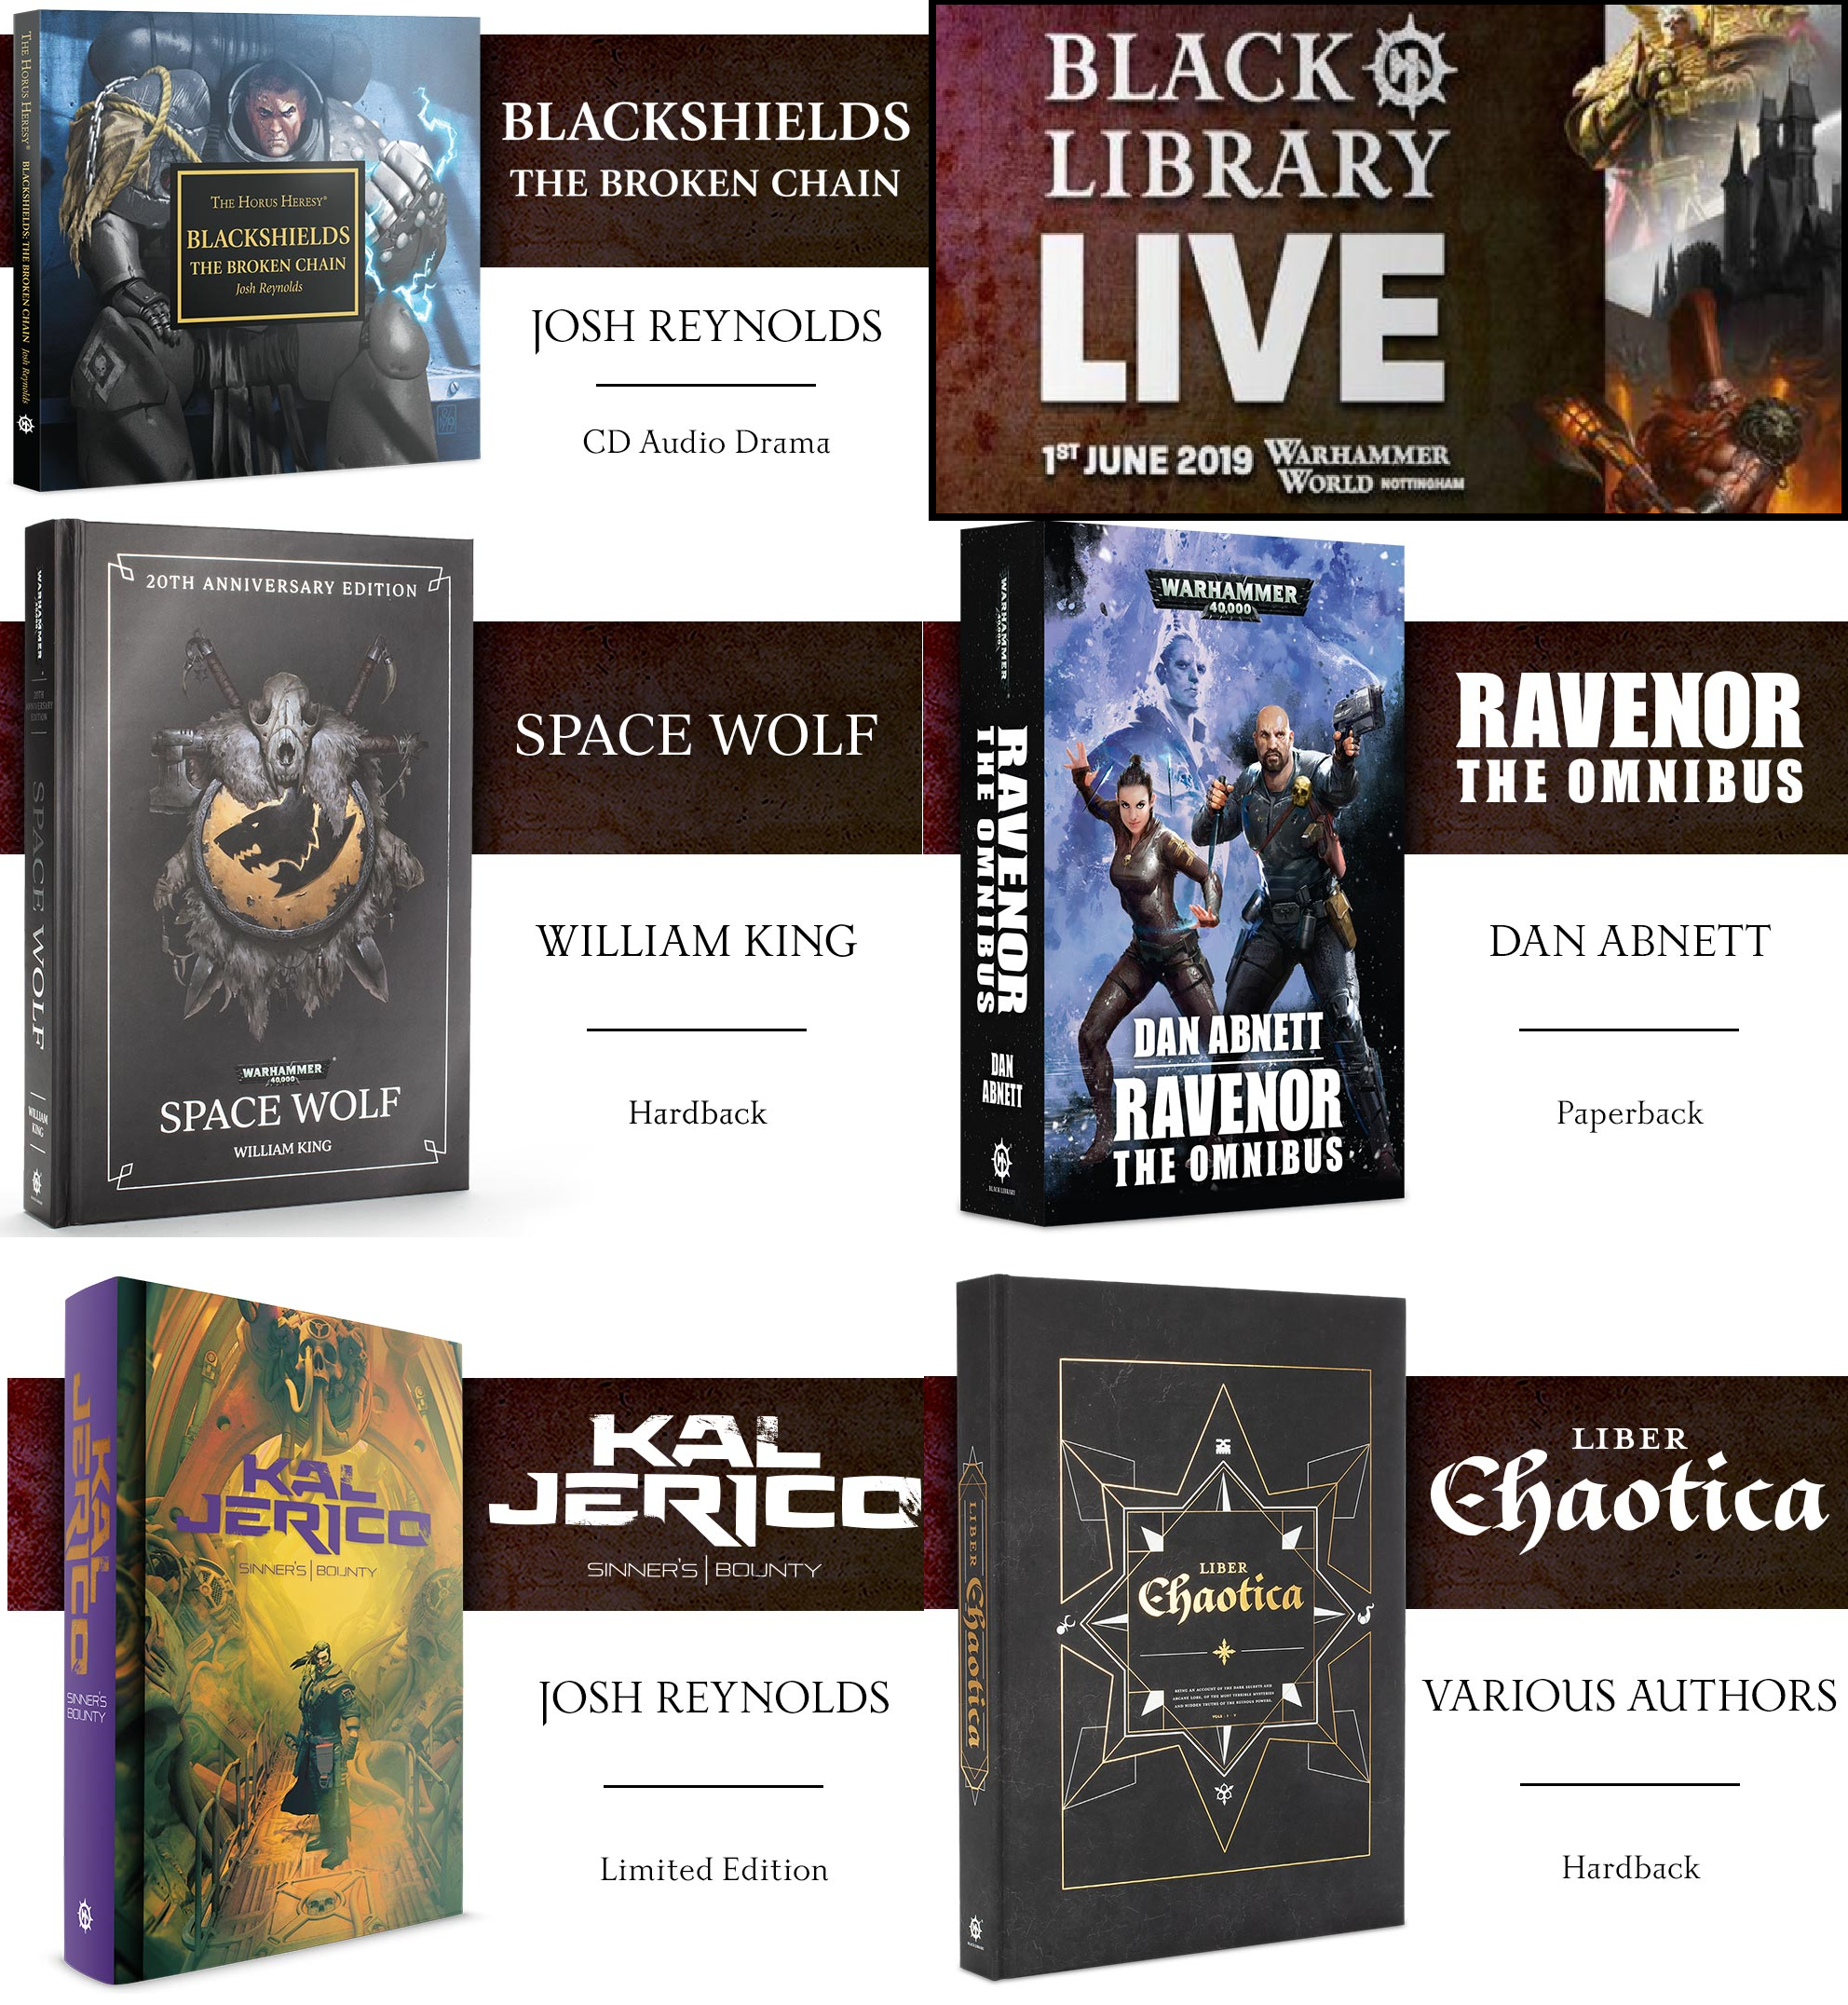 black-library-live-2019.png